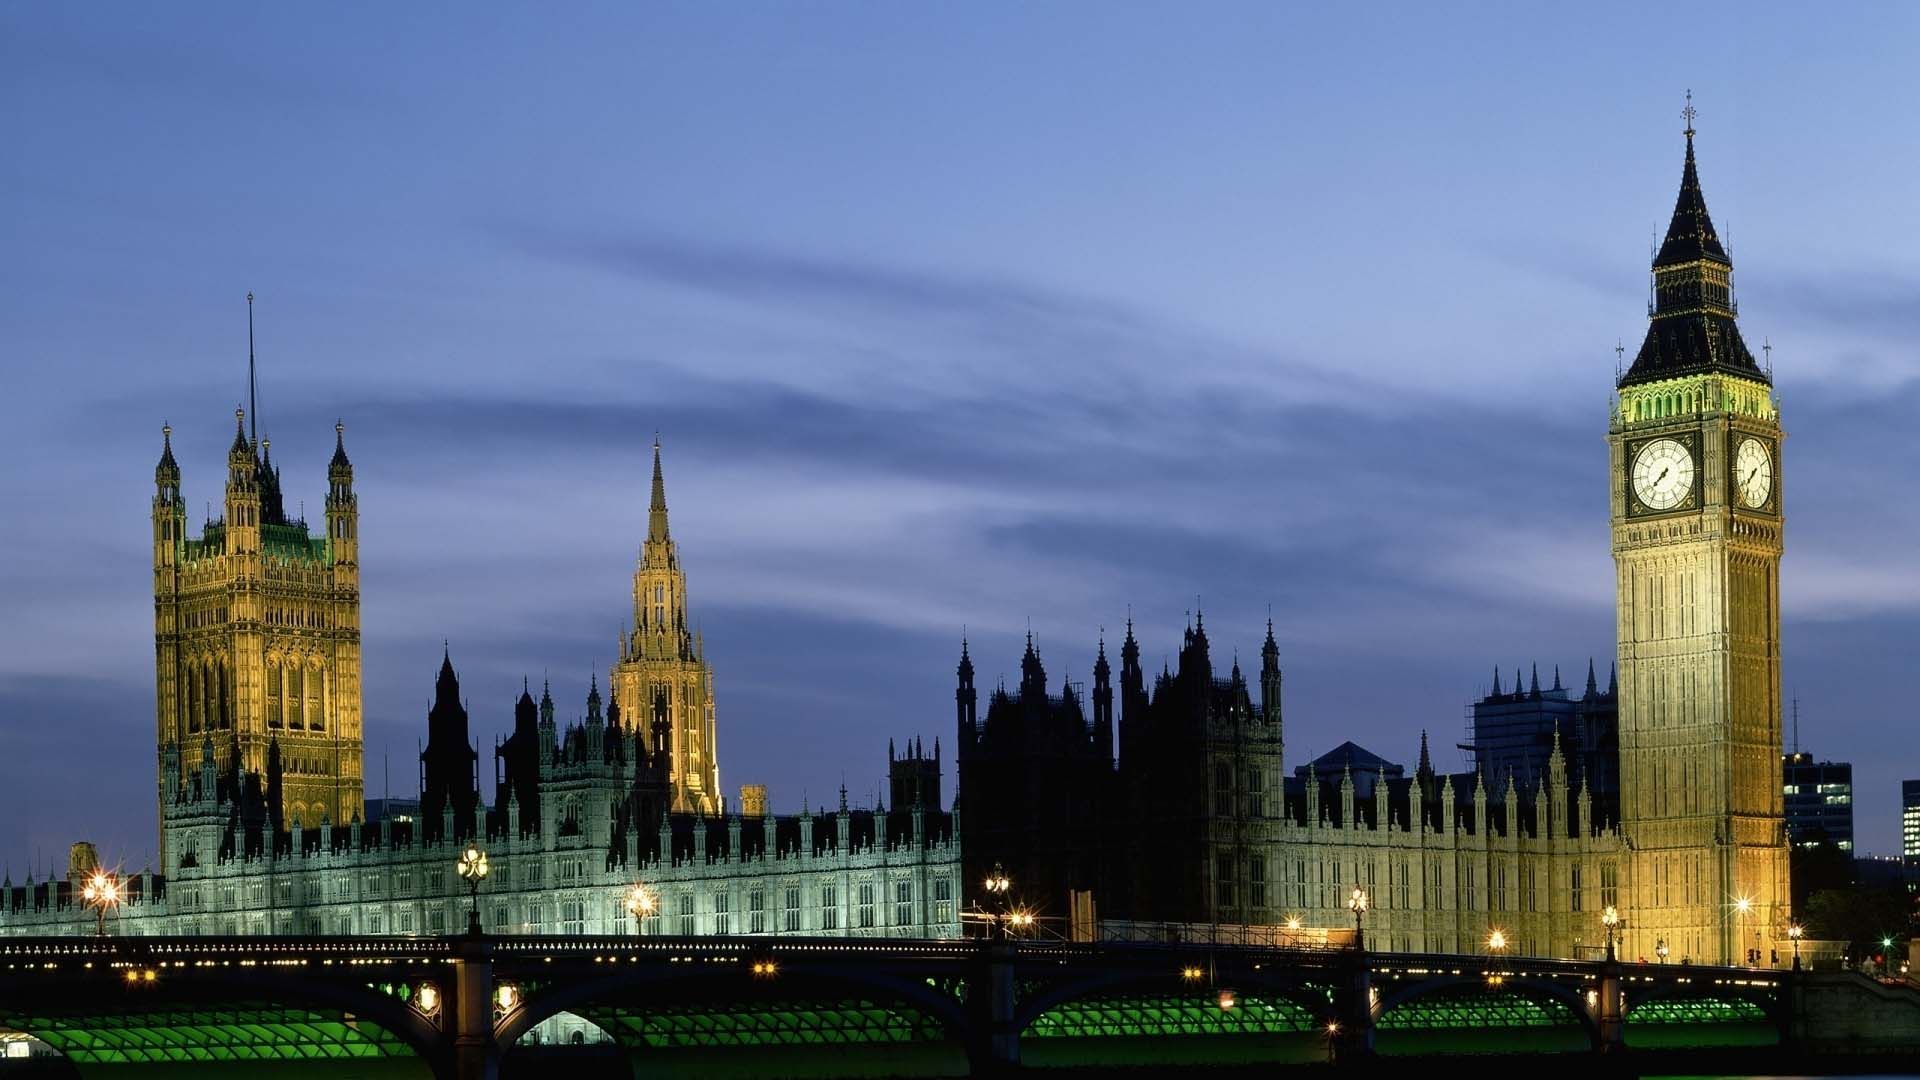 Palace Of Westminster. HD Travel Wallpaper for Mobile and Desktop